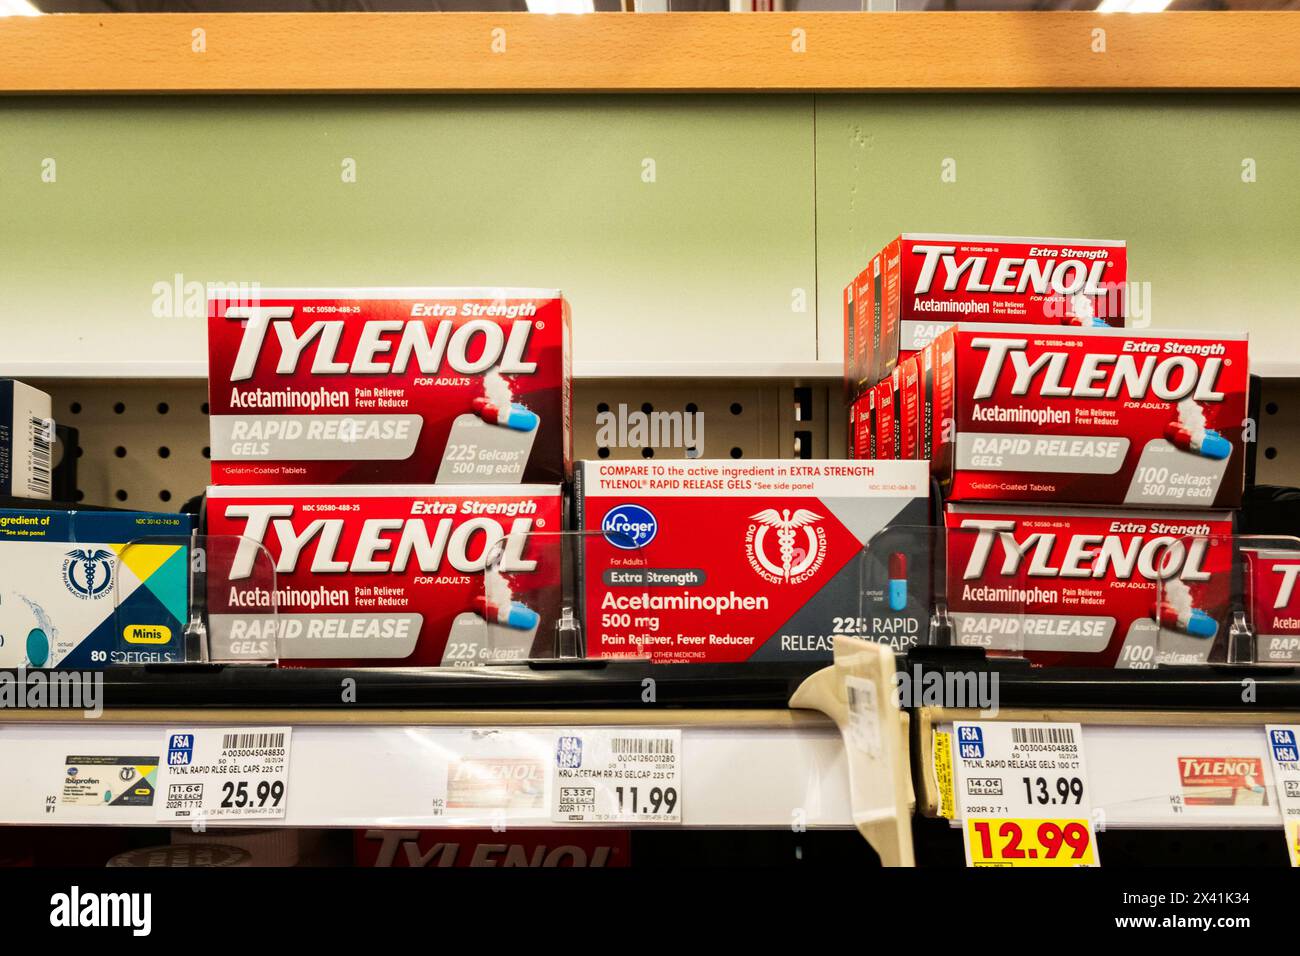 Market shelf holding boxes of Tylenol brand acetaminophen tablets for pain & fever. USA. Stock Photo